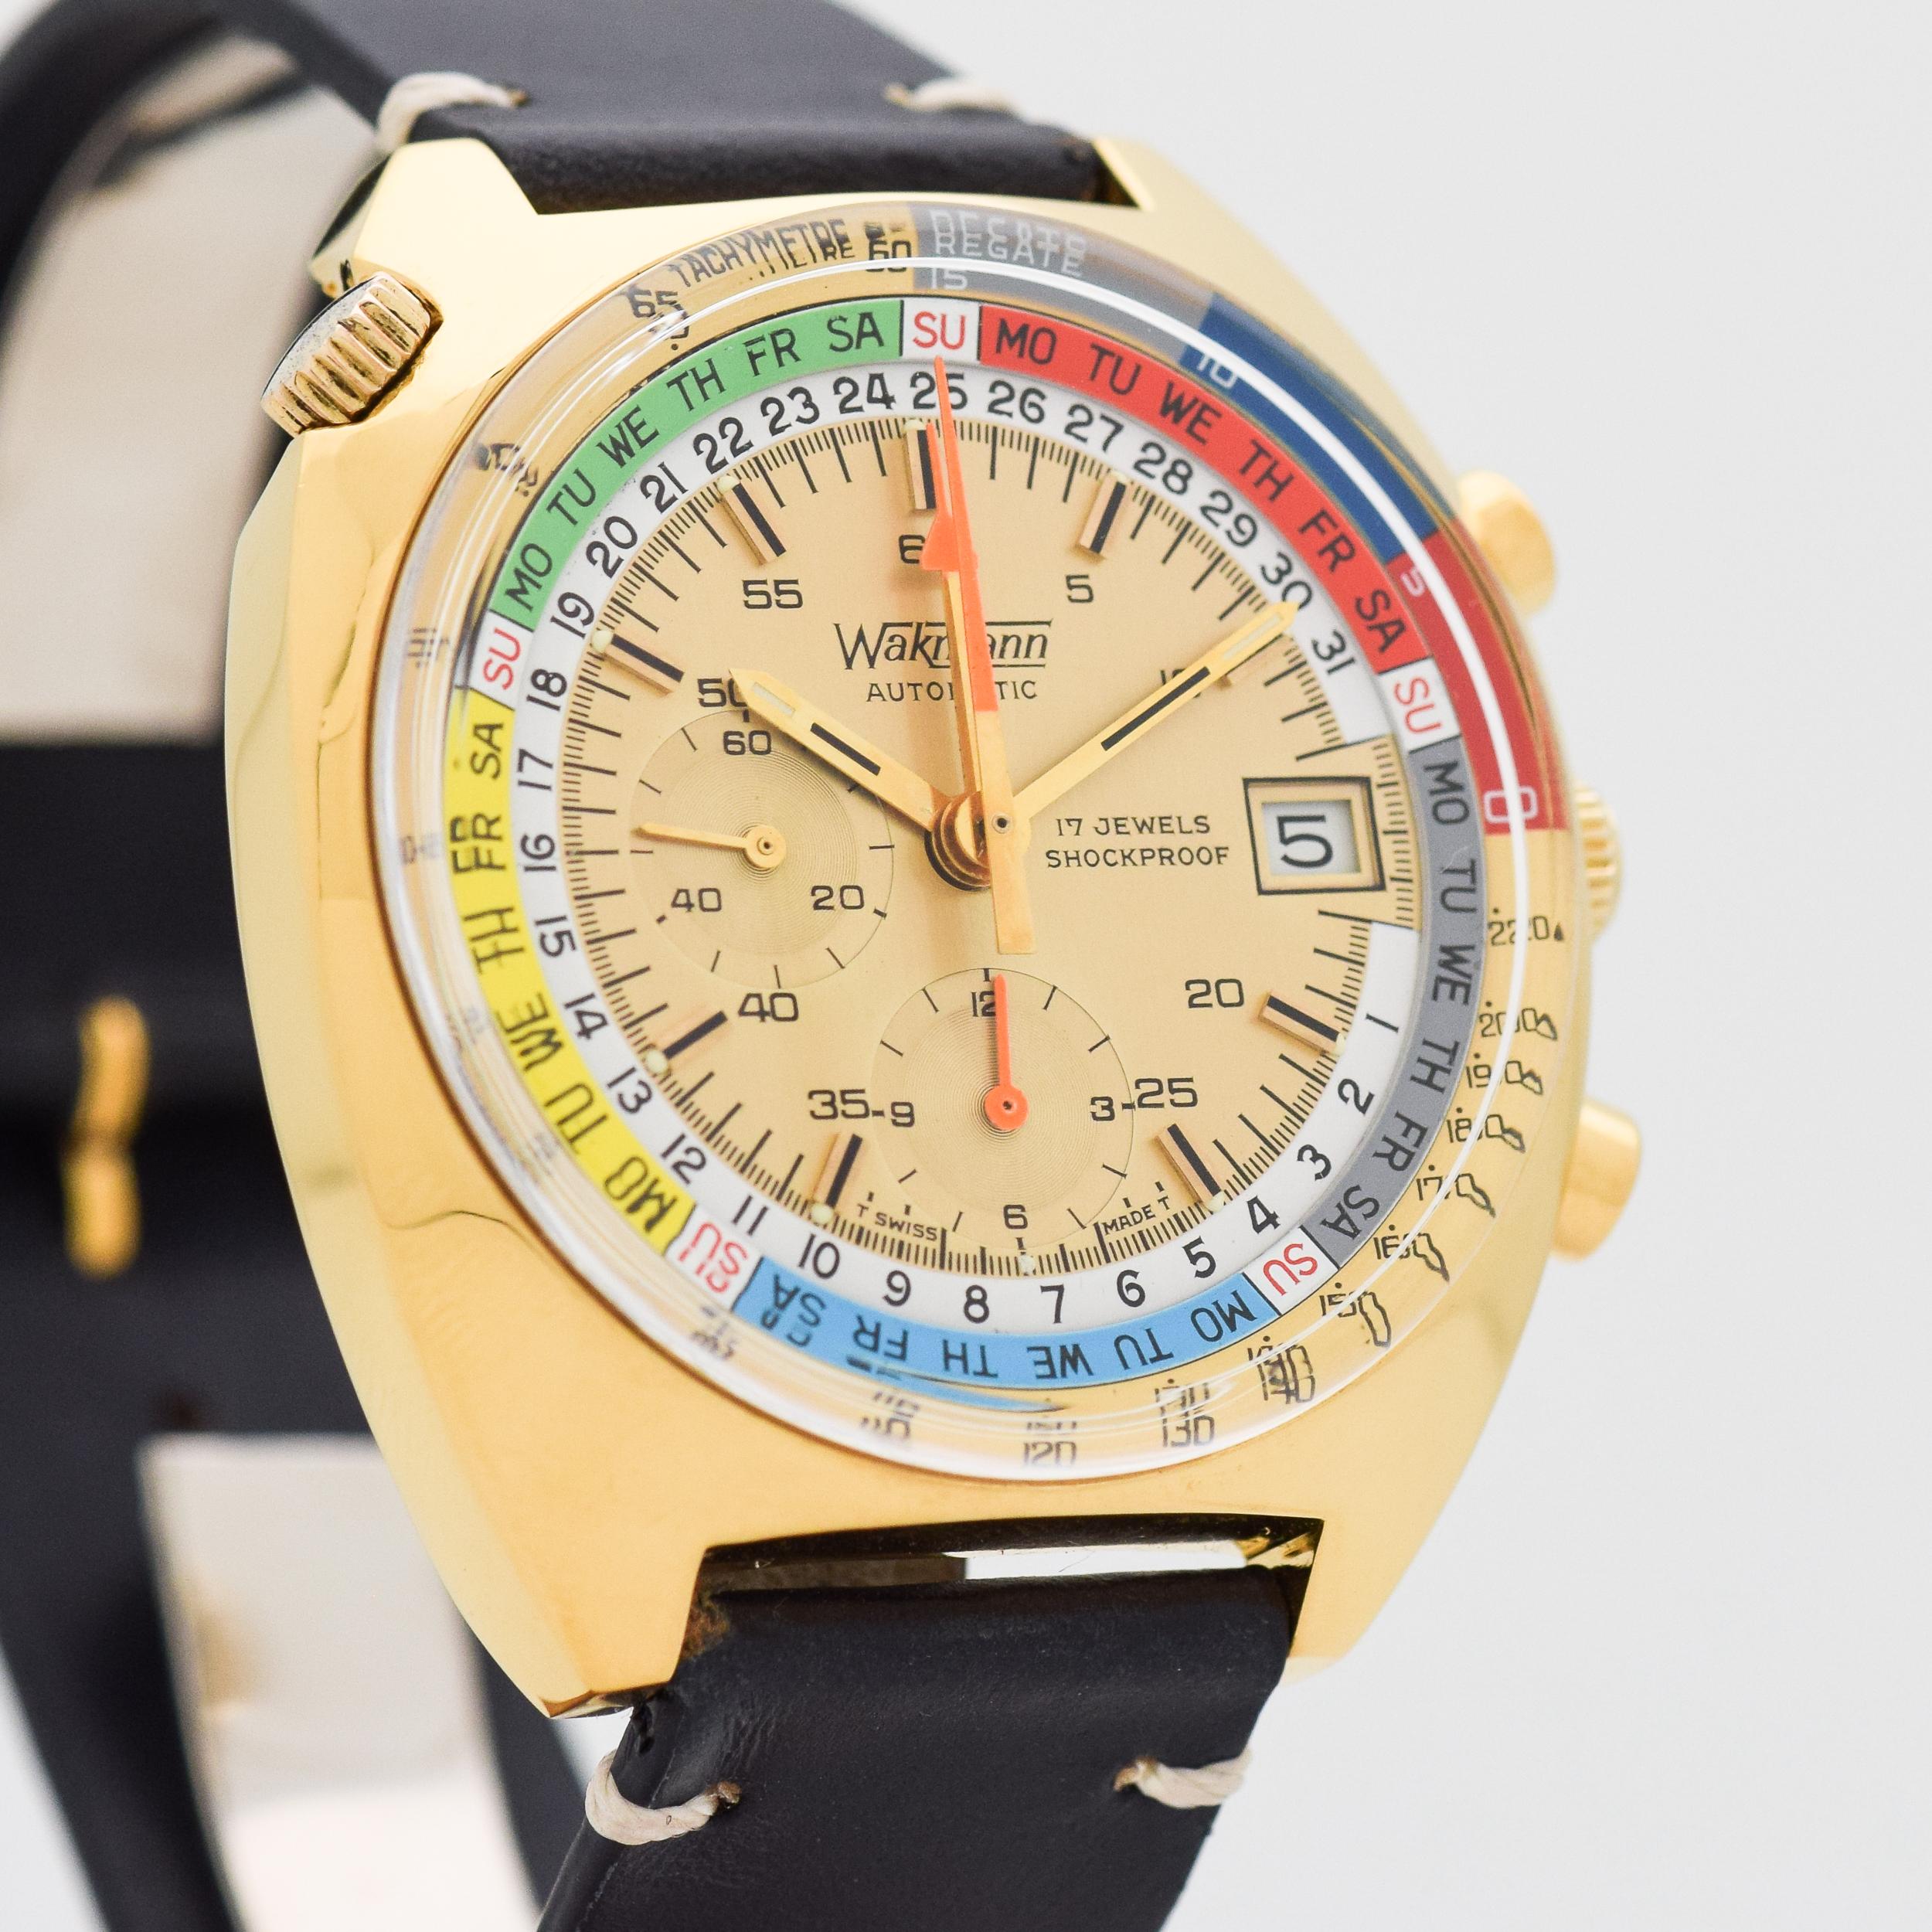 1970's Vintage Wakmann Automatic Day - Date 2 Register Chronograph Base Metal watch with RARE Original Multi-color (Red, Dark Blue, Light Blue, Yellow, Green, Gray, and White) Dial with Applied Beveled Gold Color Bar Markers. 42mm x 47mm lug to lug